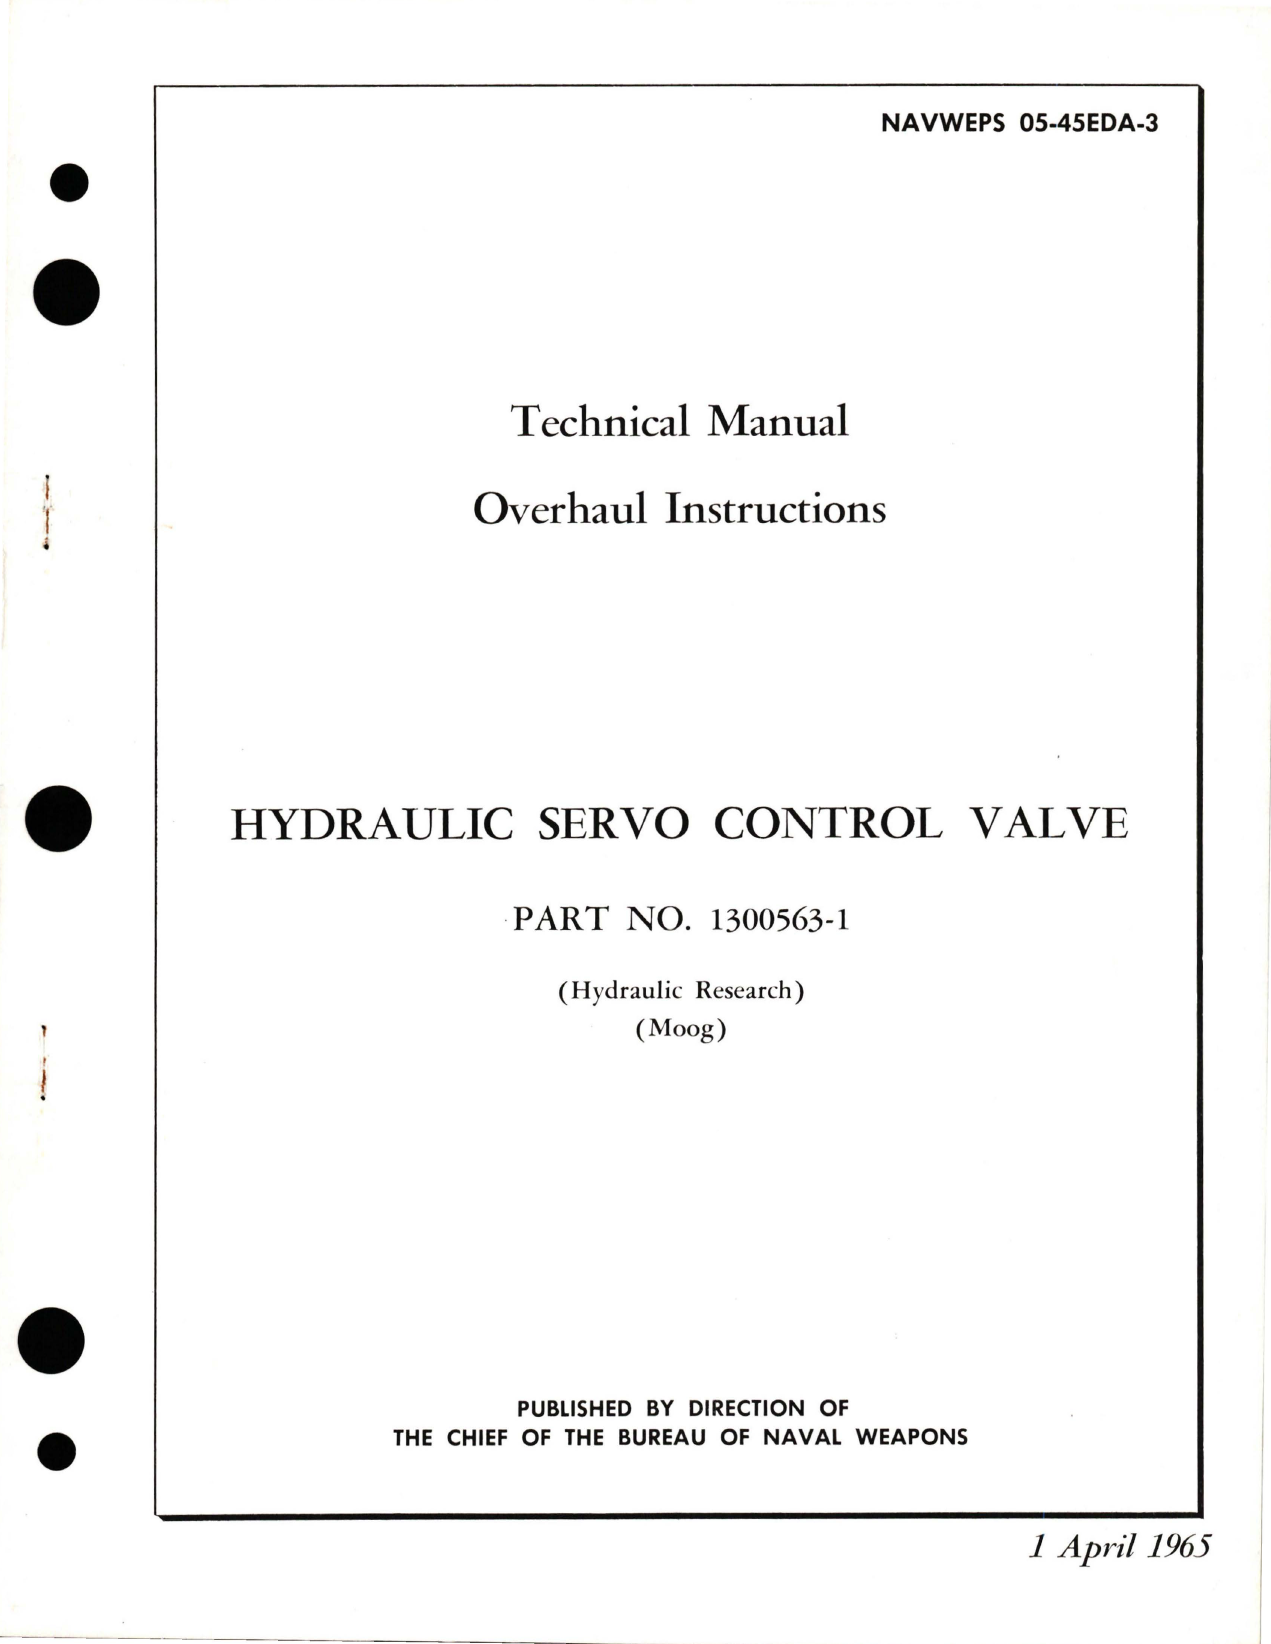 Sample page 1 from AirCorps Library document: Overhaul Instructions for Hydraulic Servo Control Valve - Part 1300563-1 